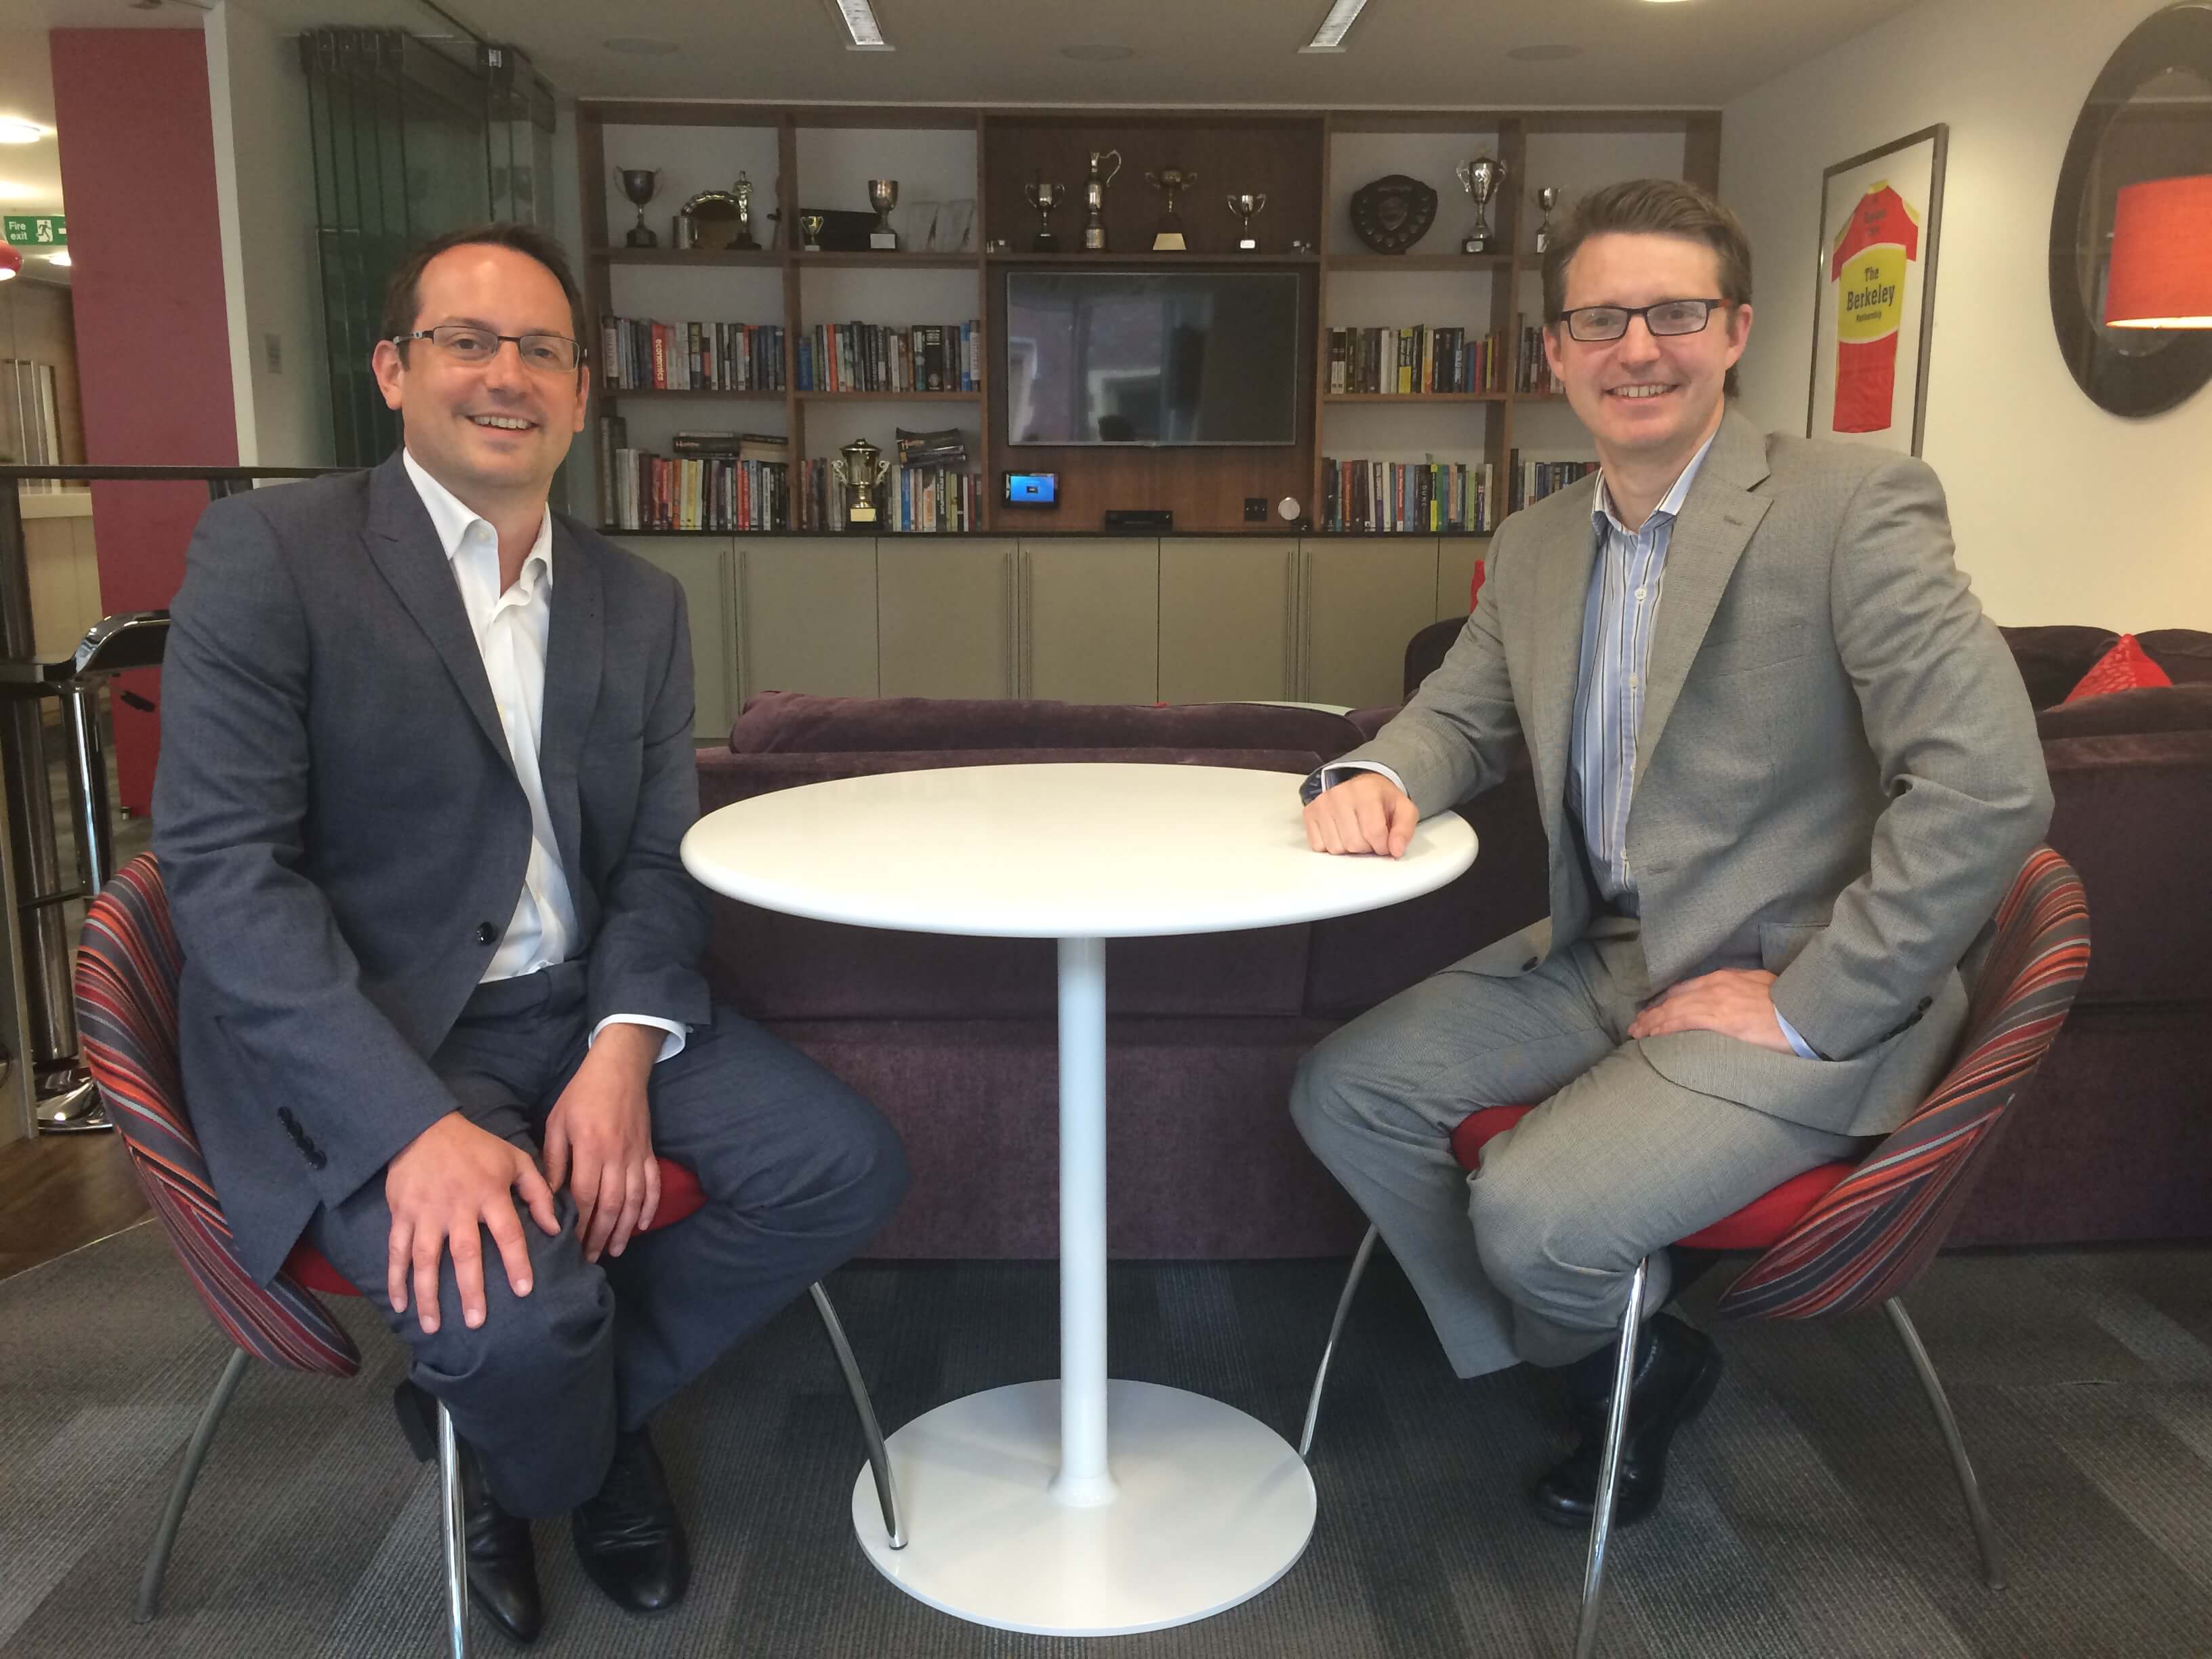 Two male colleagues pictured becoming Partners at The Berkeley Partnership to help enable clients to realize their business transformation objectives